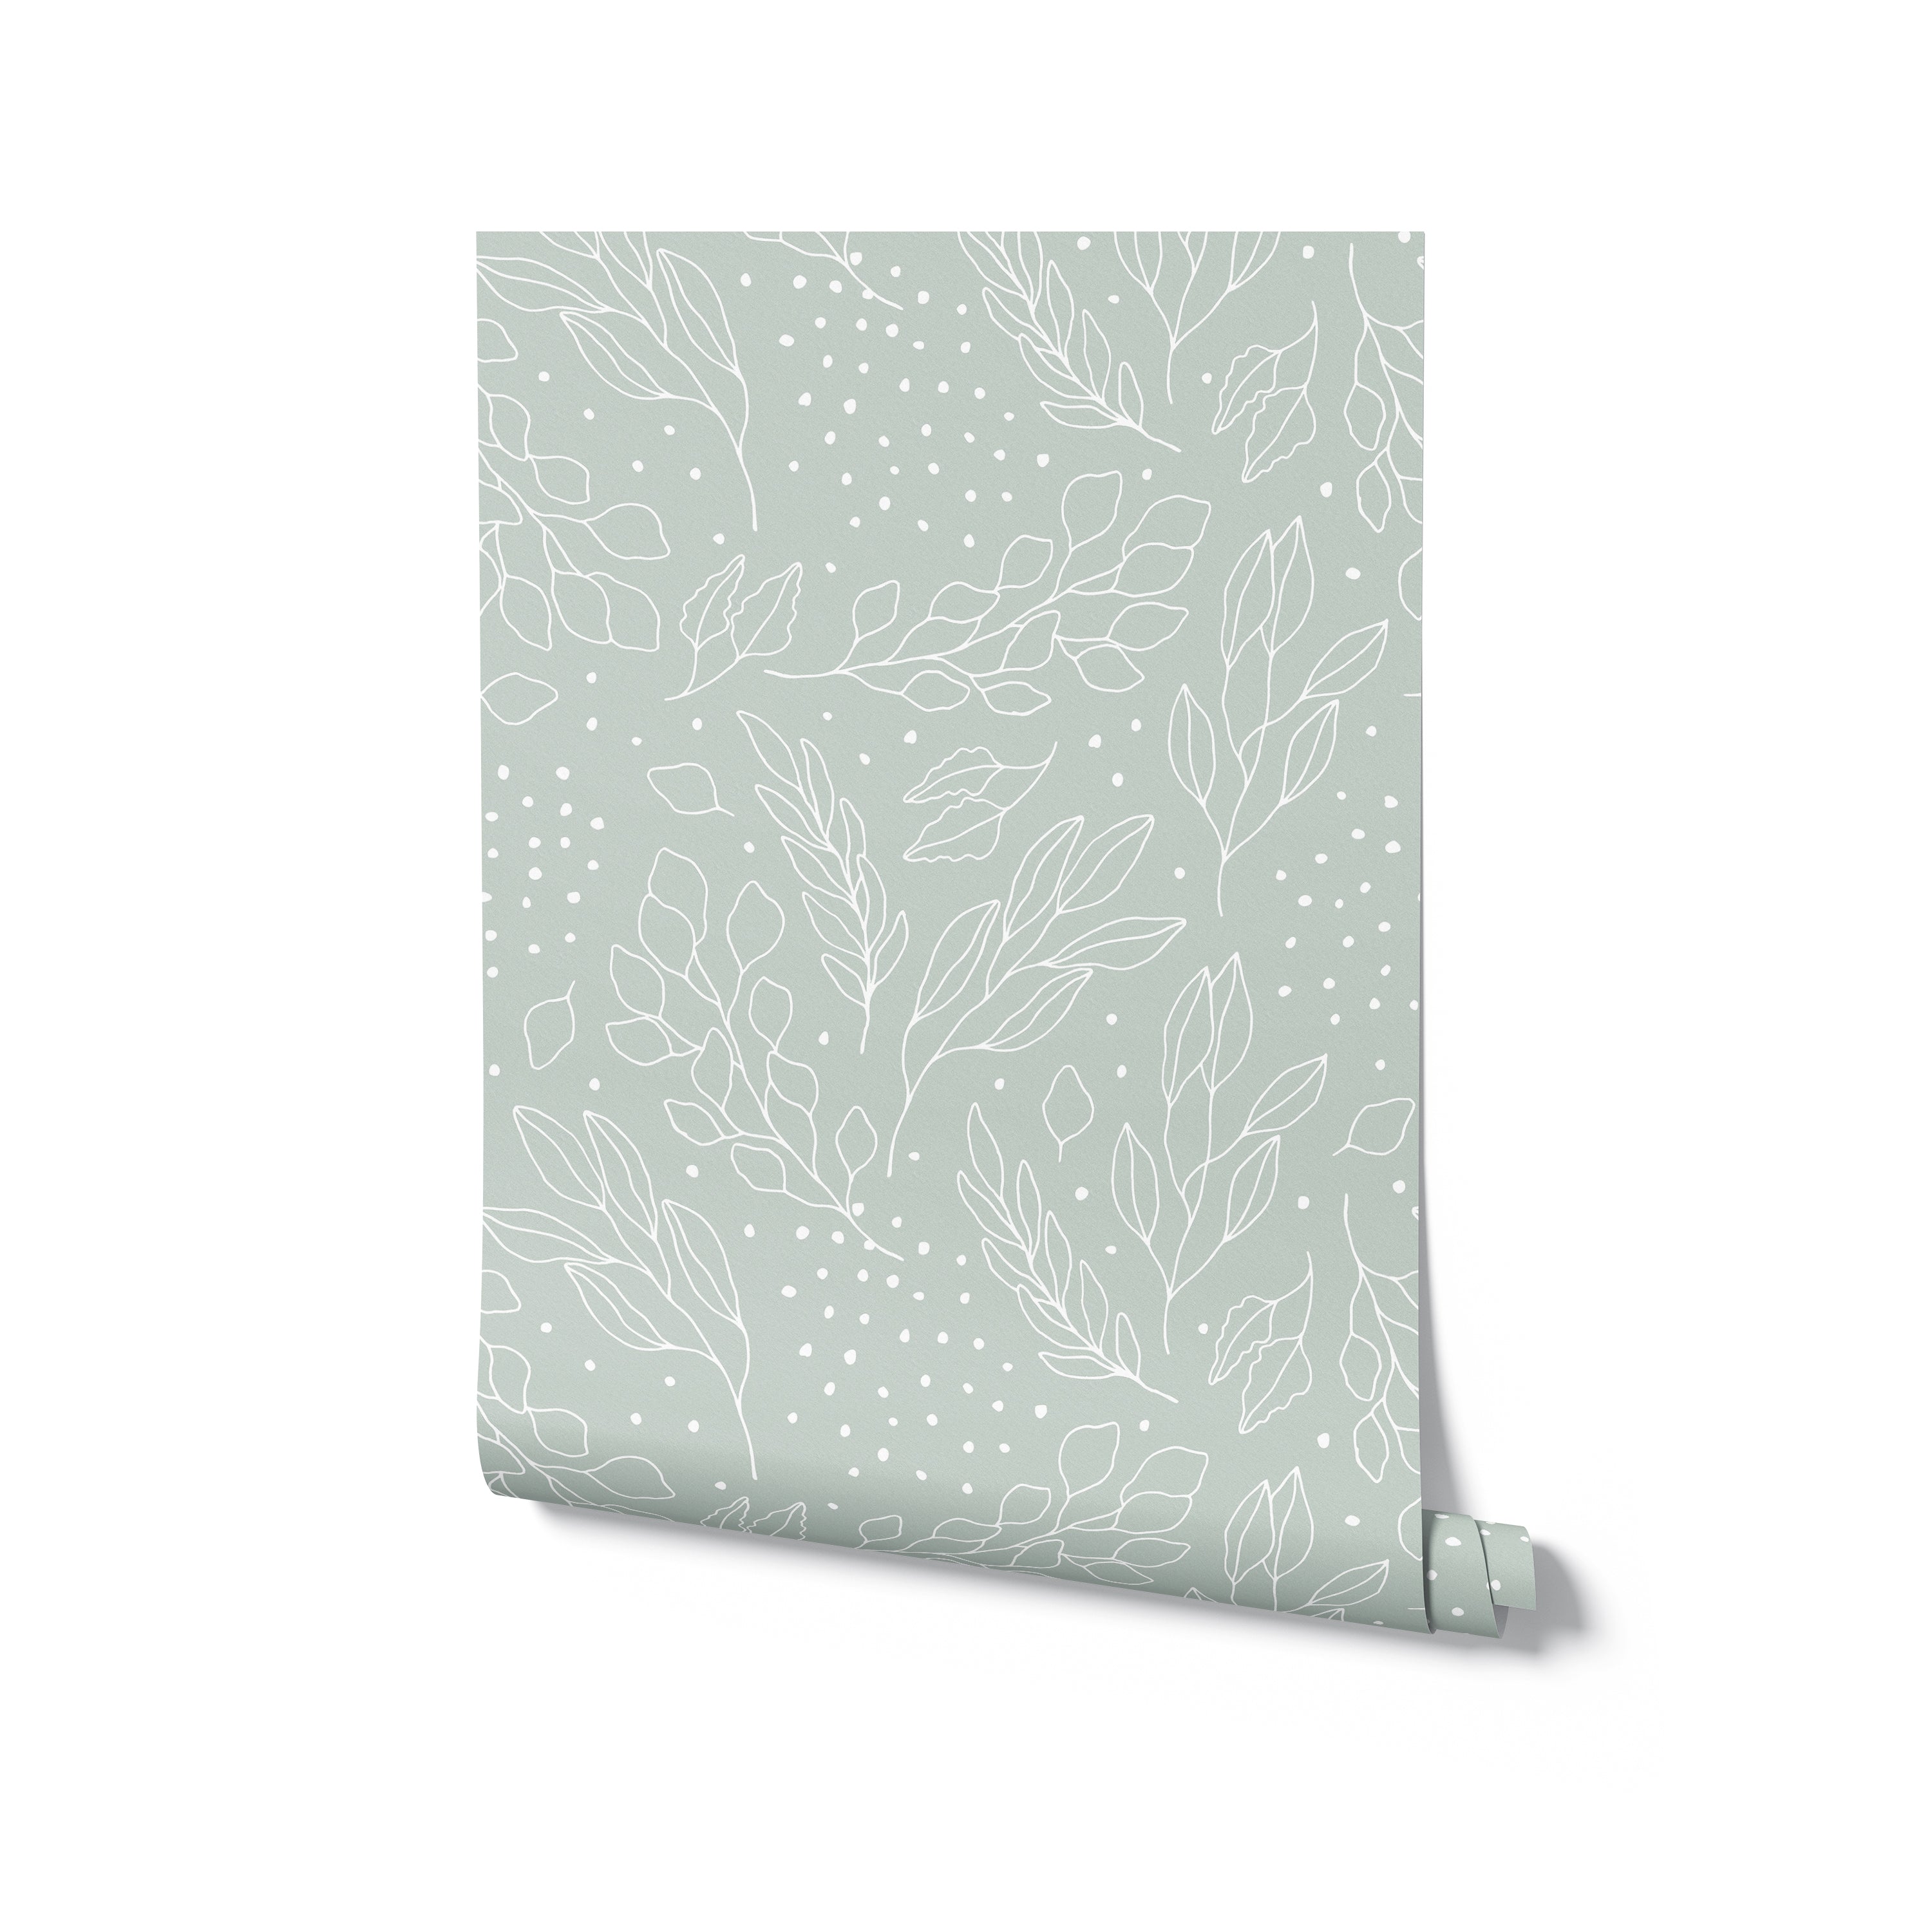 Rolled Ferns and Leaves Wallpaper featuring a continuous light sage green leaf pattern. This design exudes a fresh and airy feel, perfect for modern home decor that calls for a natural touch